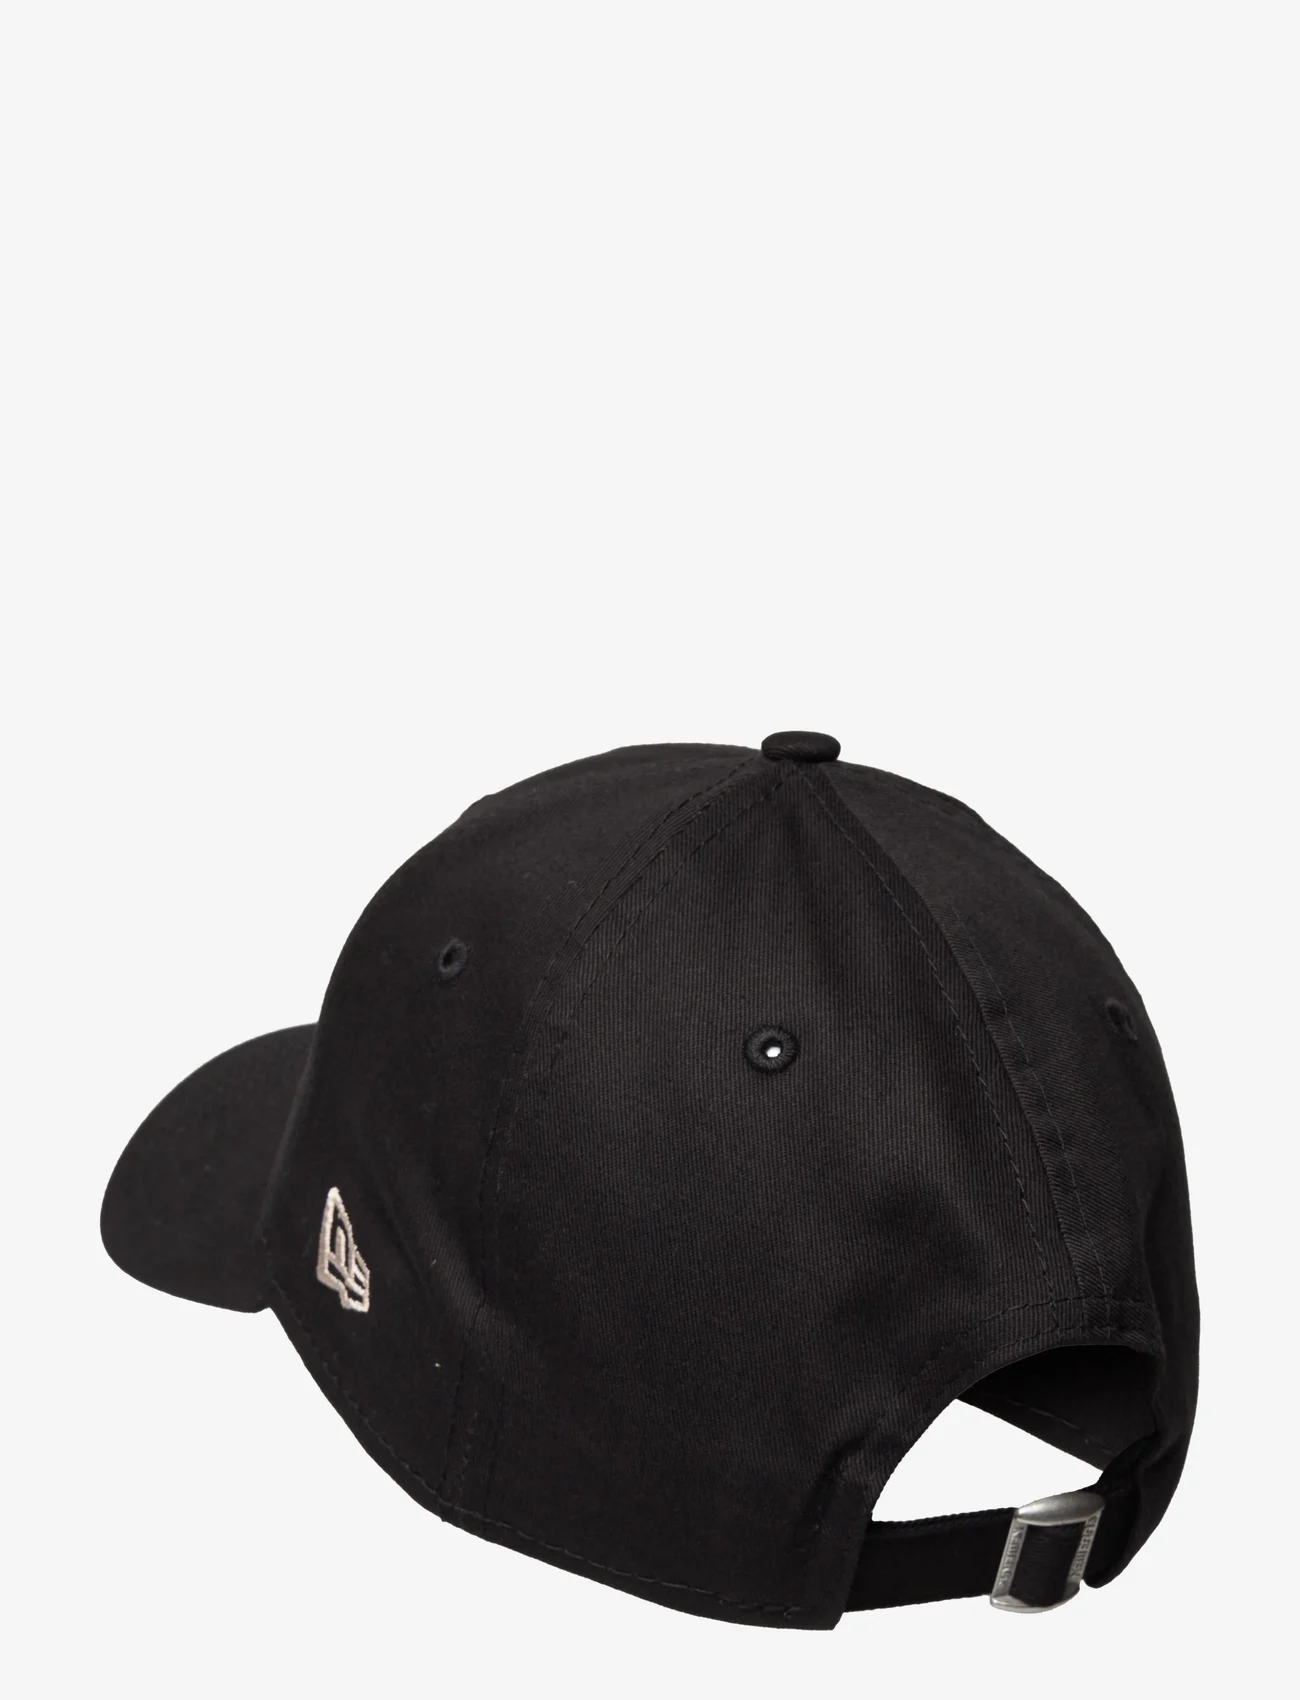 New Era - LEAGUE ESSENTIAL 9FORTY BOSRE - blkstn - 1